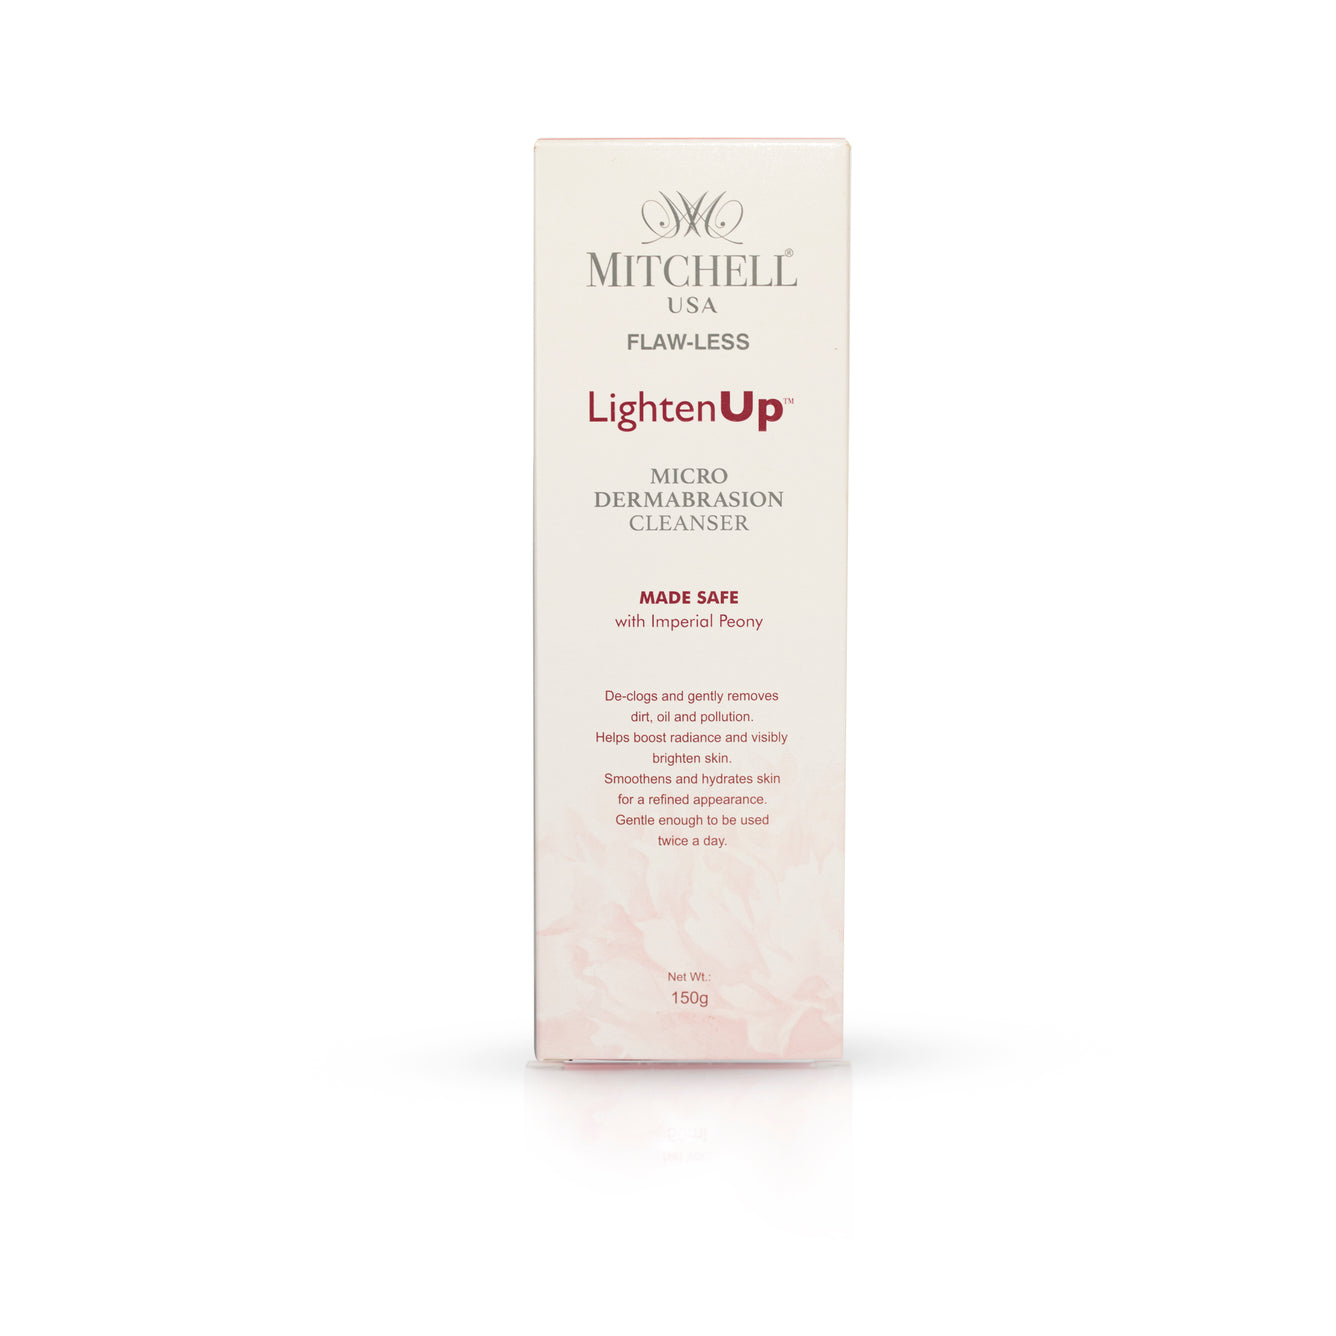 Lighten Up Flaw-Less Micro Dermabrasion Cleanser 150g Mitchell Brands - Mitchell Brands - Skin Lightening, Skin Brightening, Fade Dark Spots, Shea Butter, Hair Growth Products